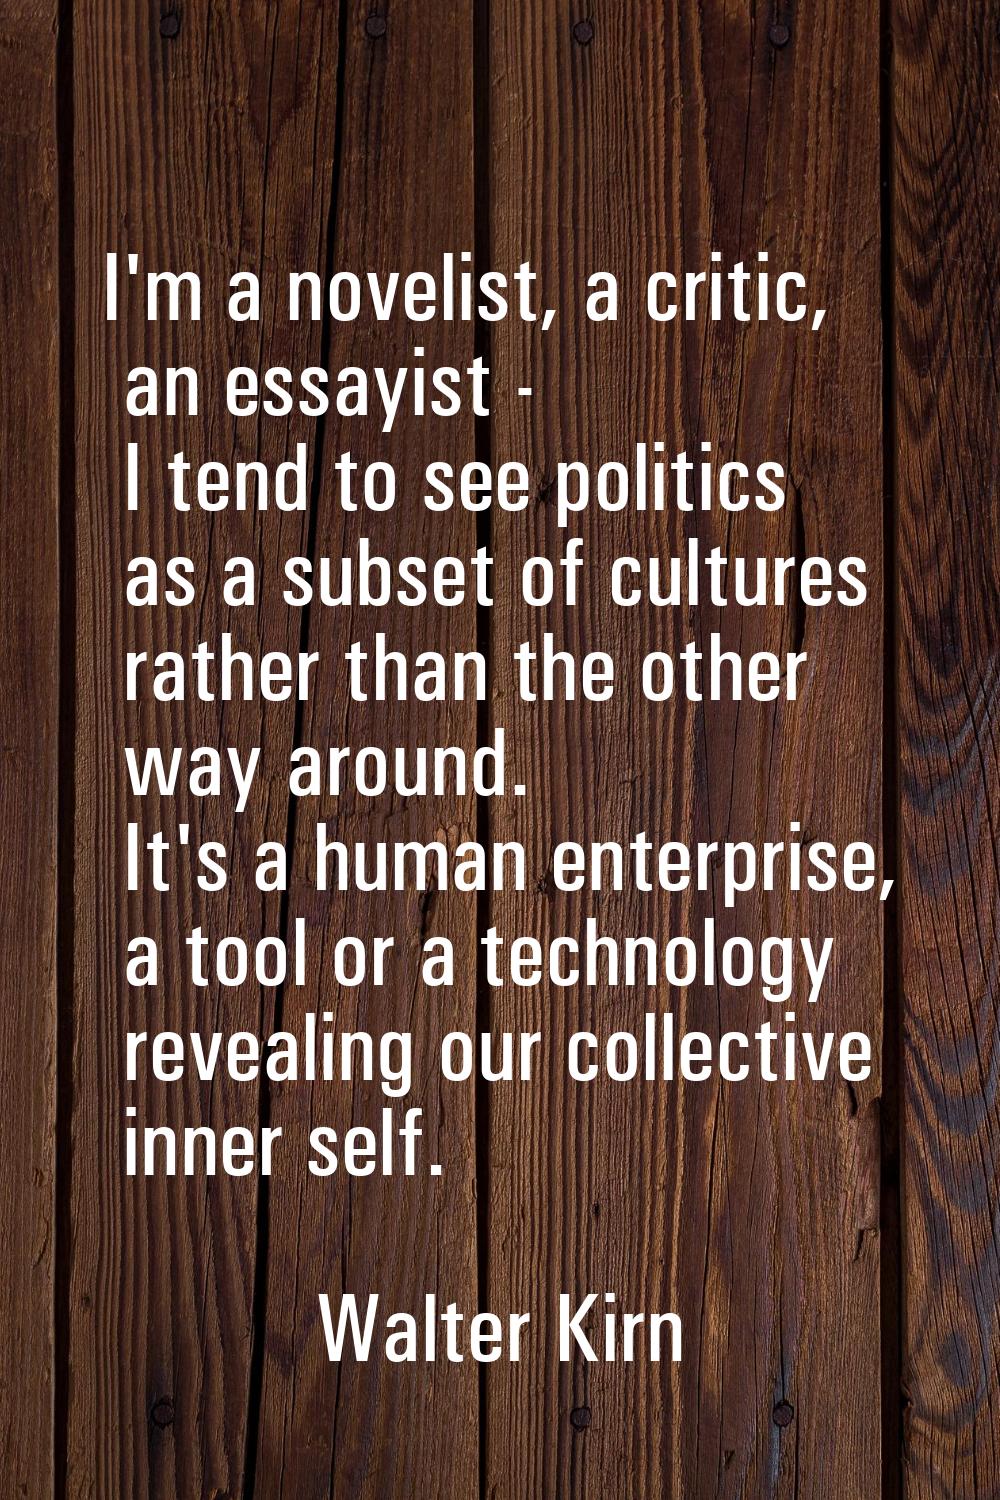 I'm a novelist, a critic, an essayist - I tend to see politics as a subset of cultures rather than 